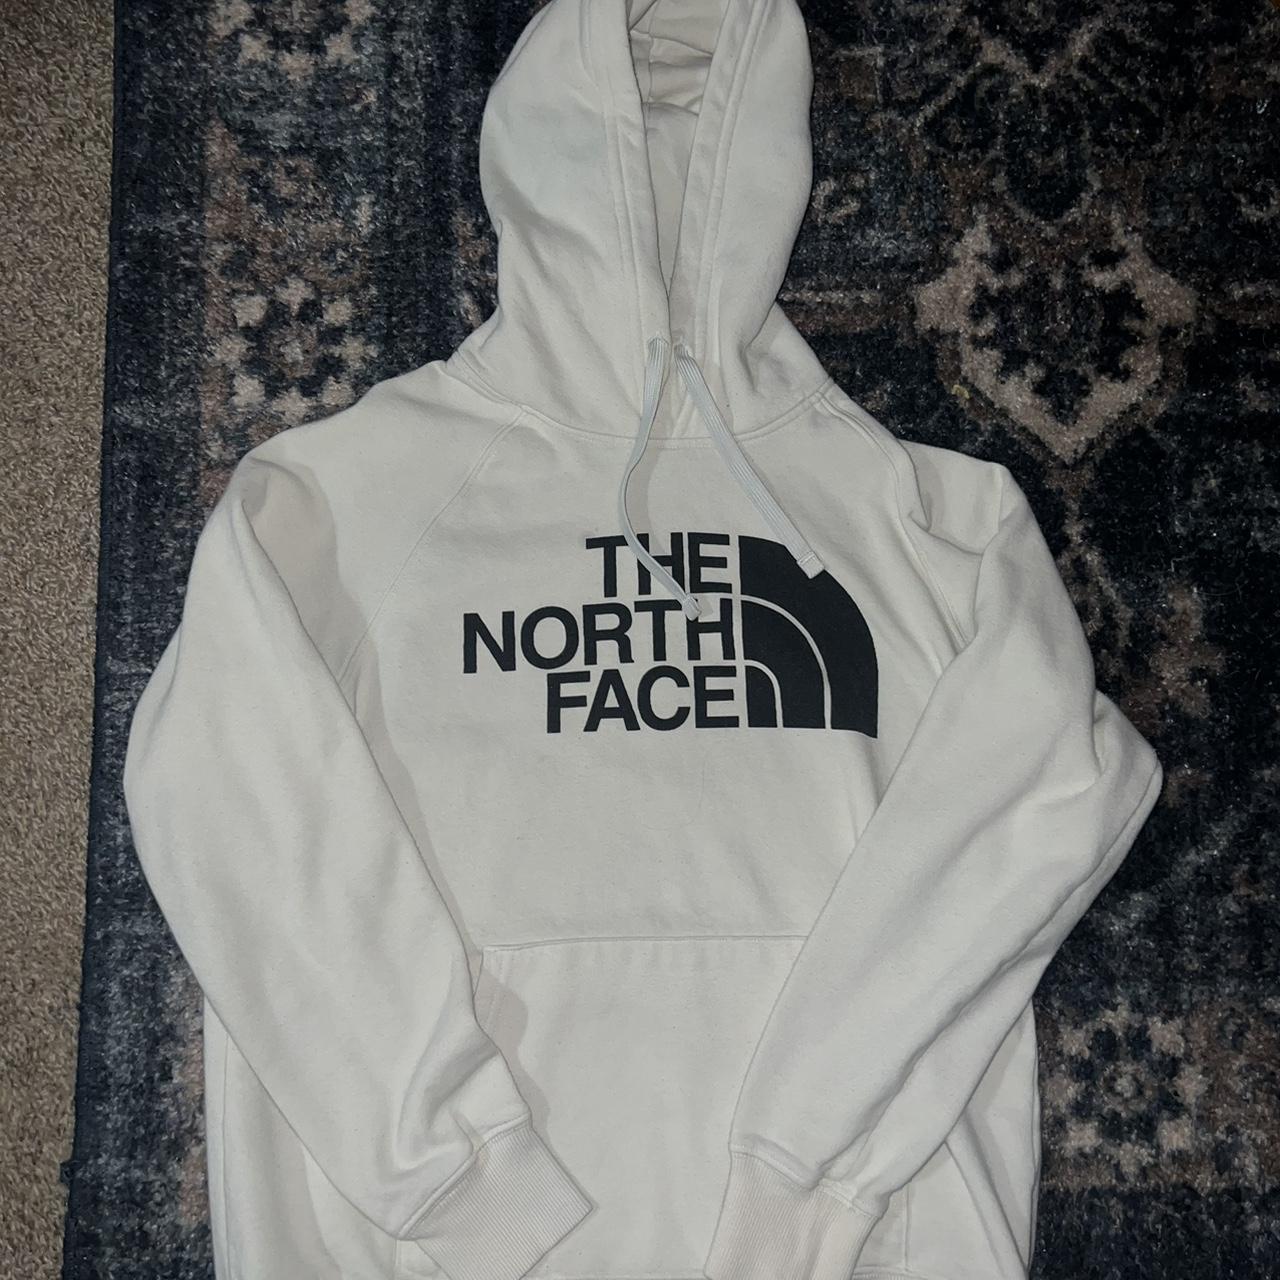 The North Face Women's White Hoodie